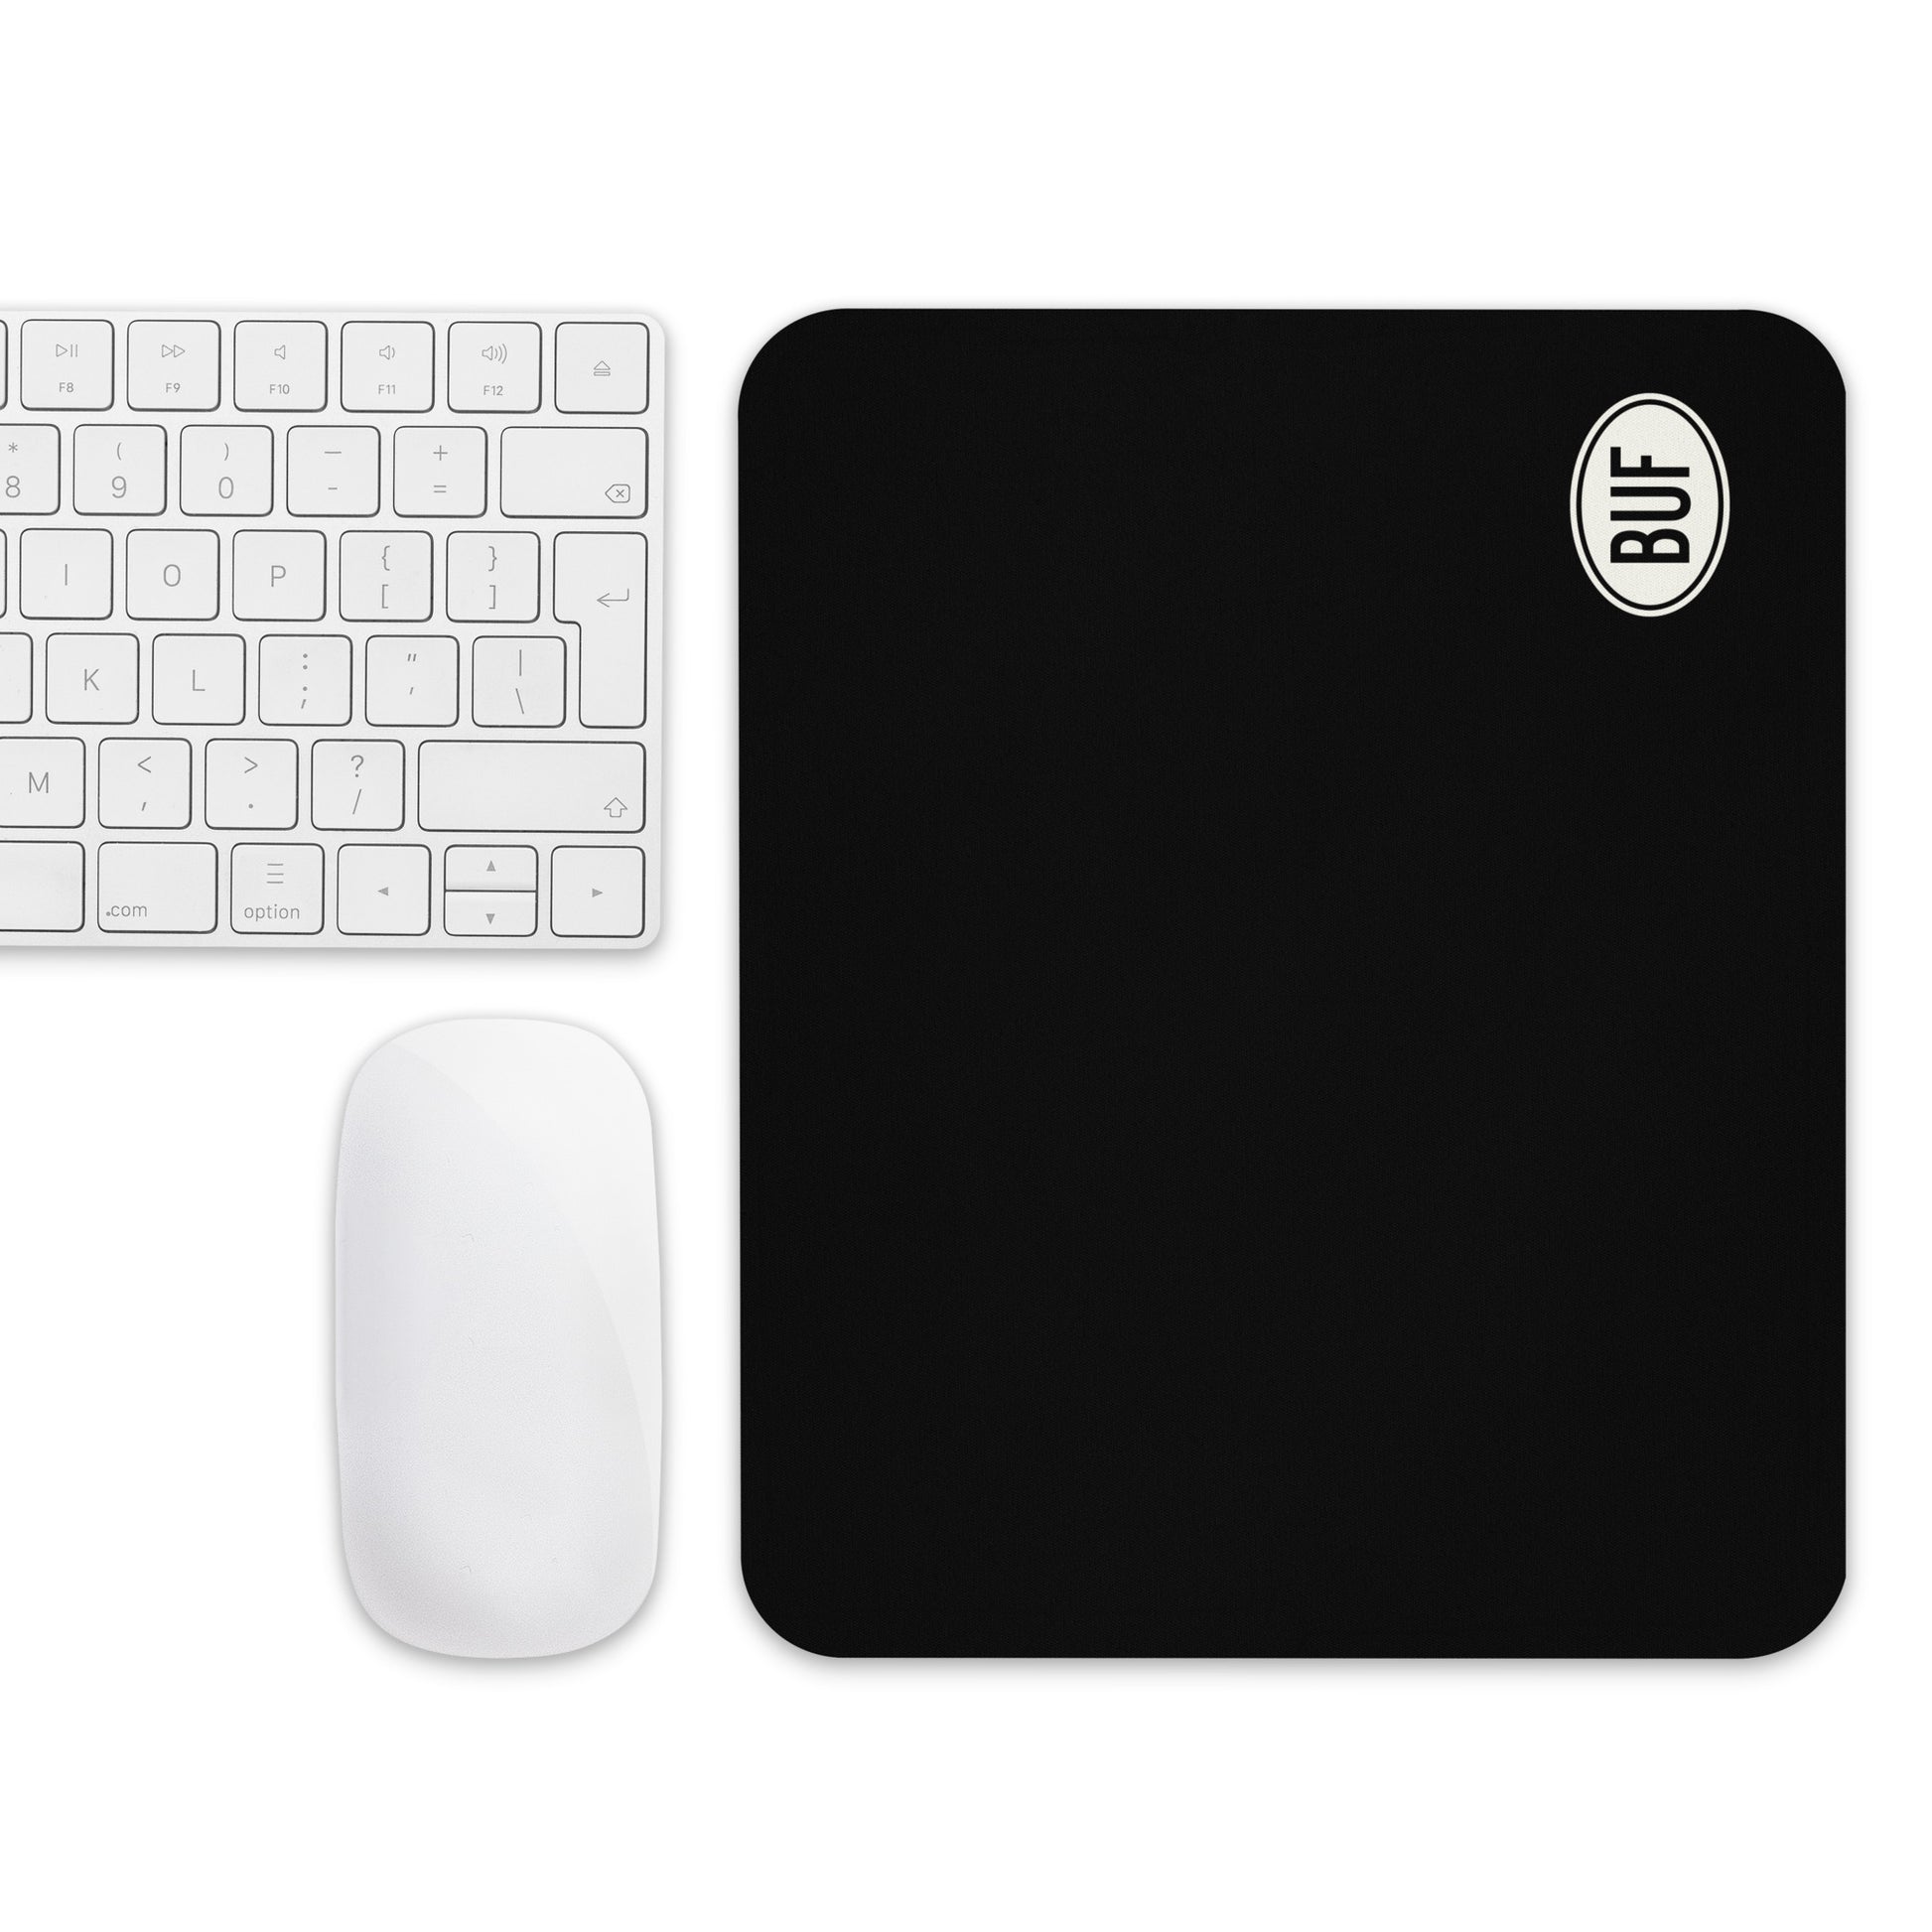 Unique Travel Gift Mouse Pad - White Oval • BUF Buffalo • YHM Designs - Image 04